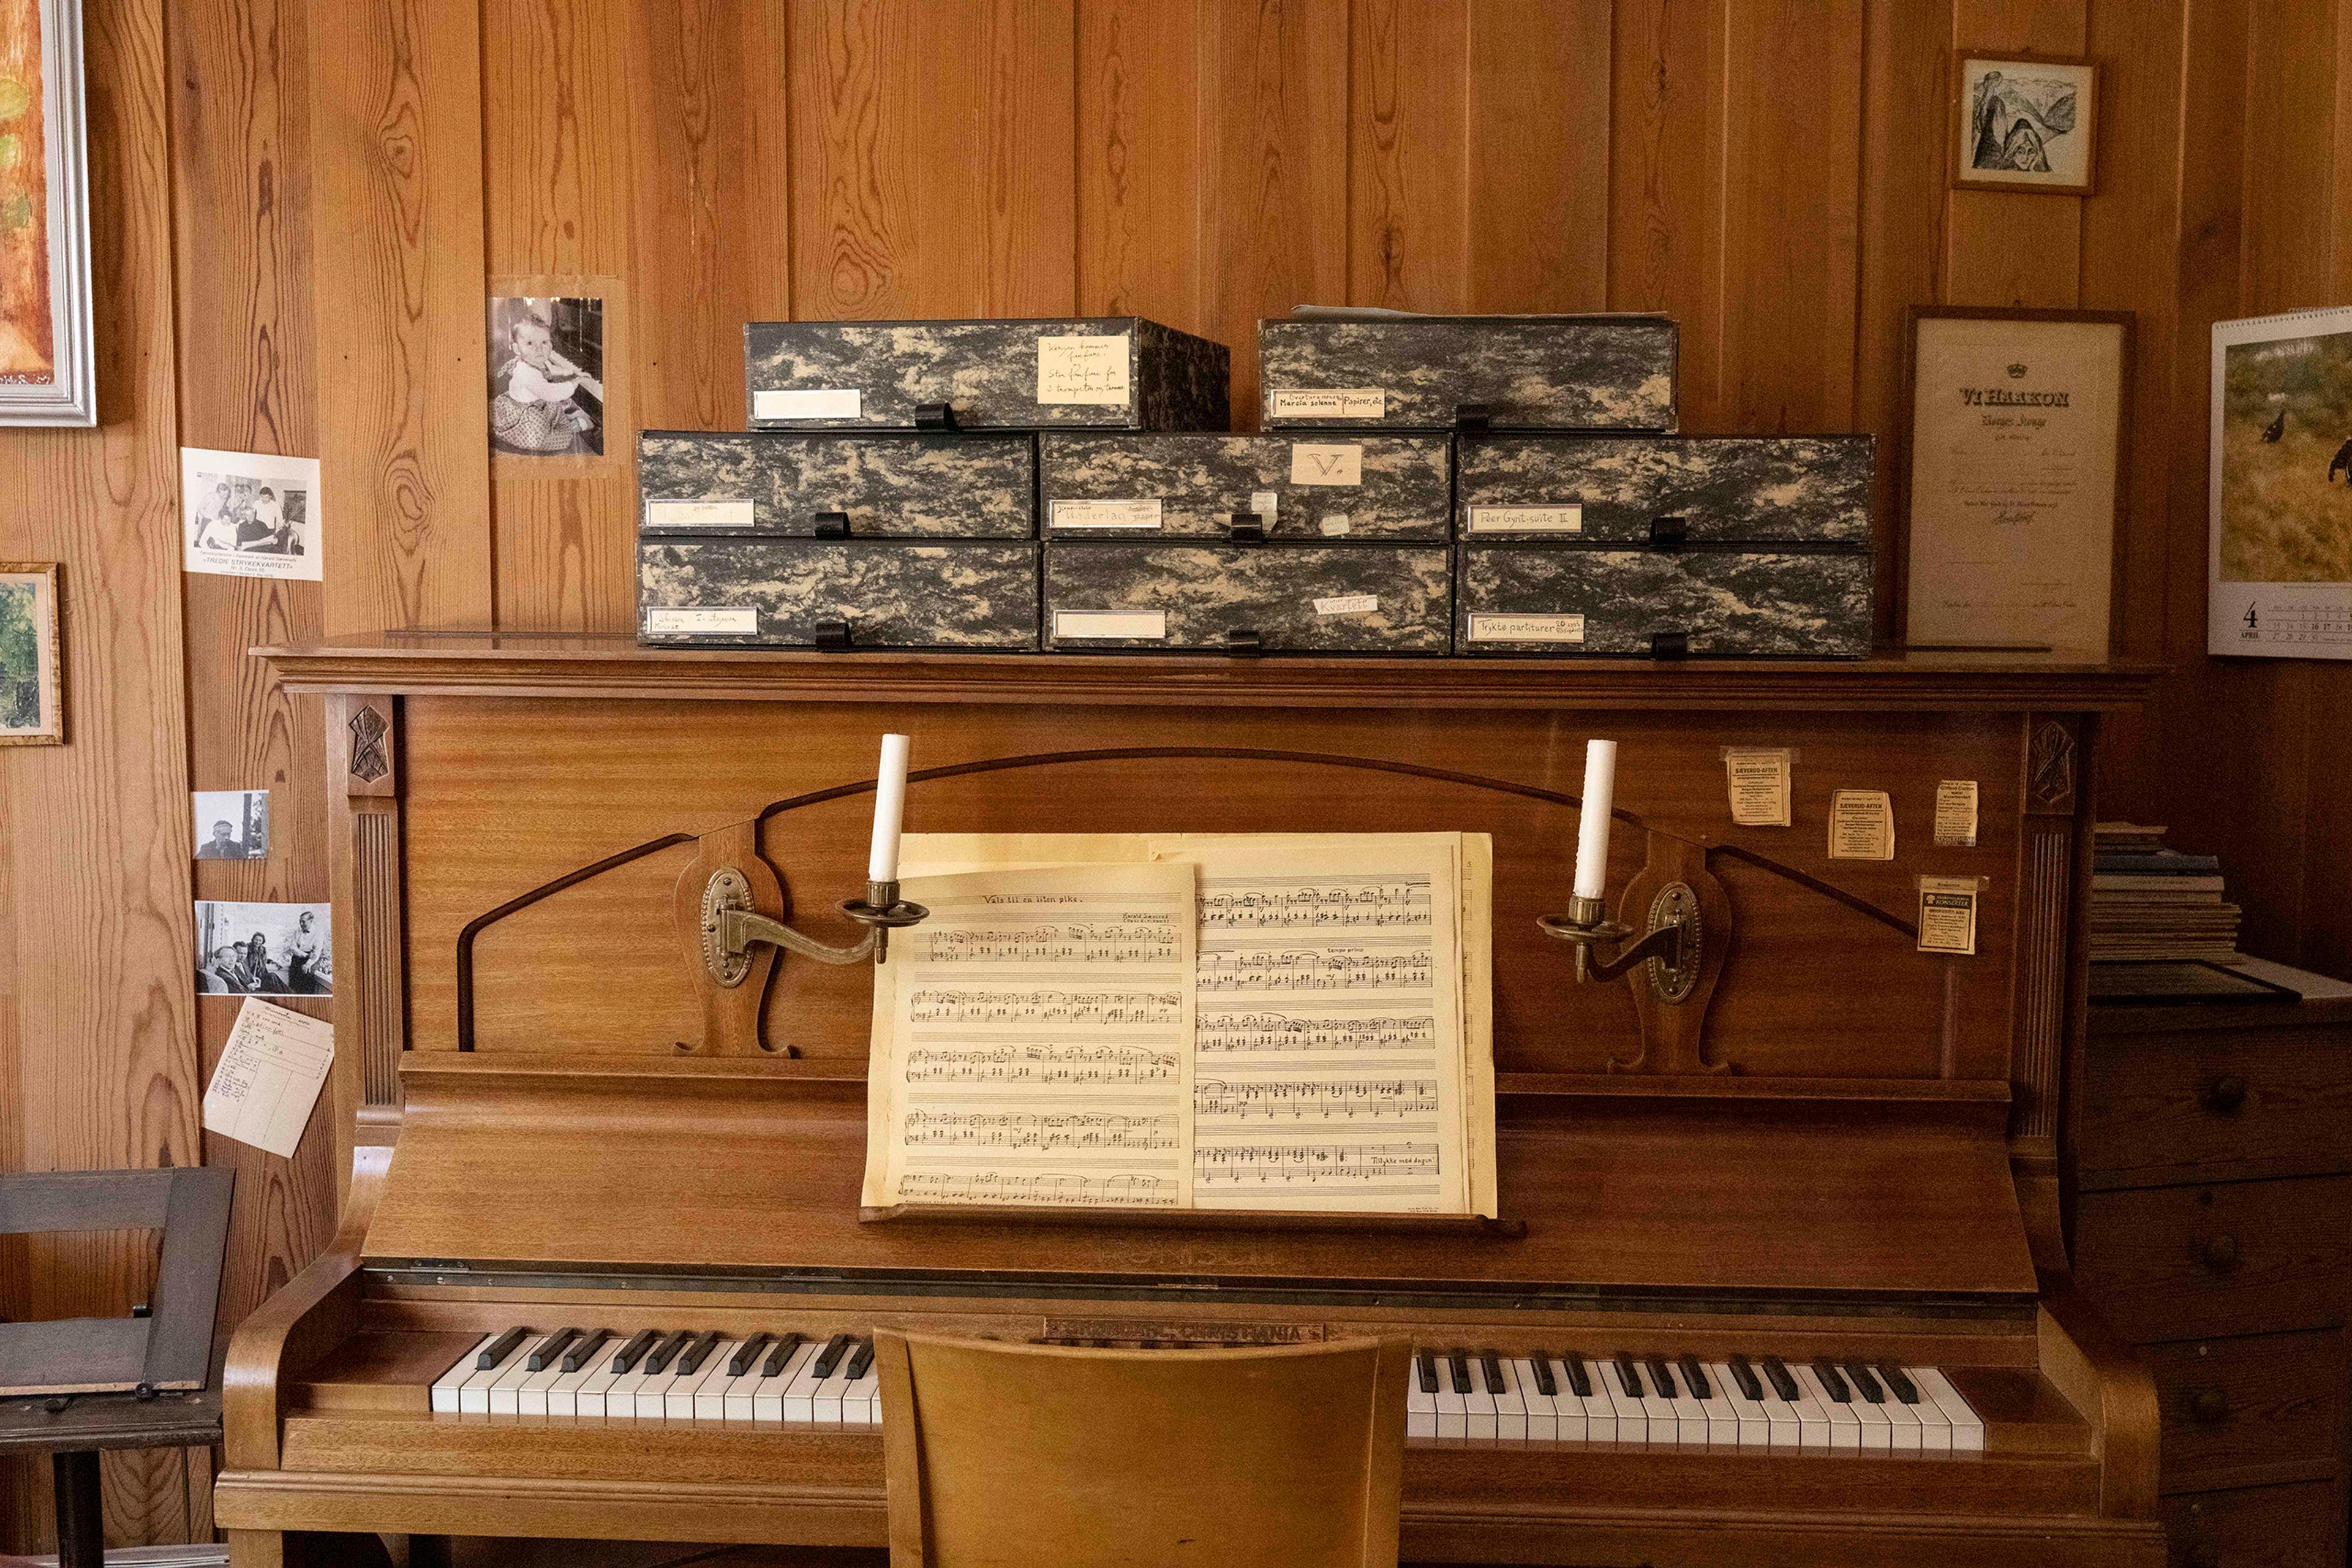 The composer´s brown piano, from inside his workspace at Siljustøl.